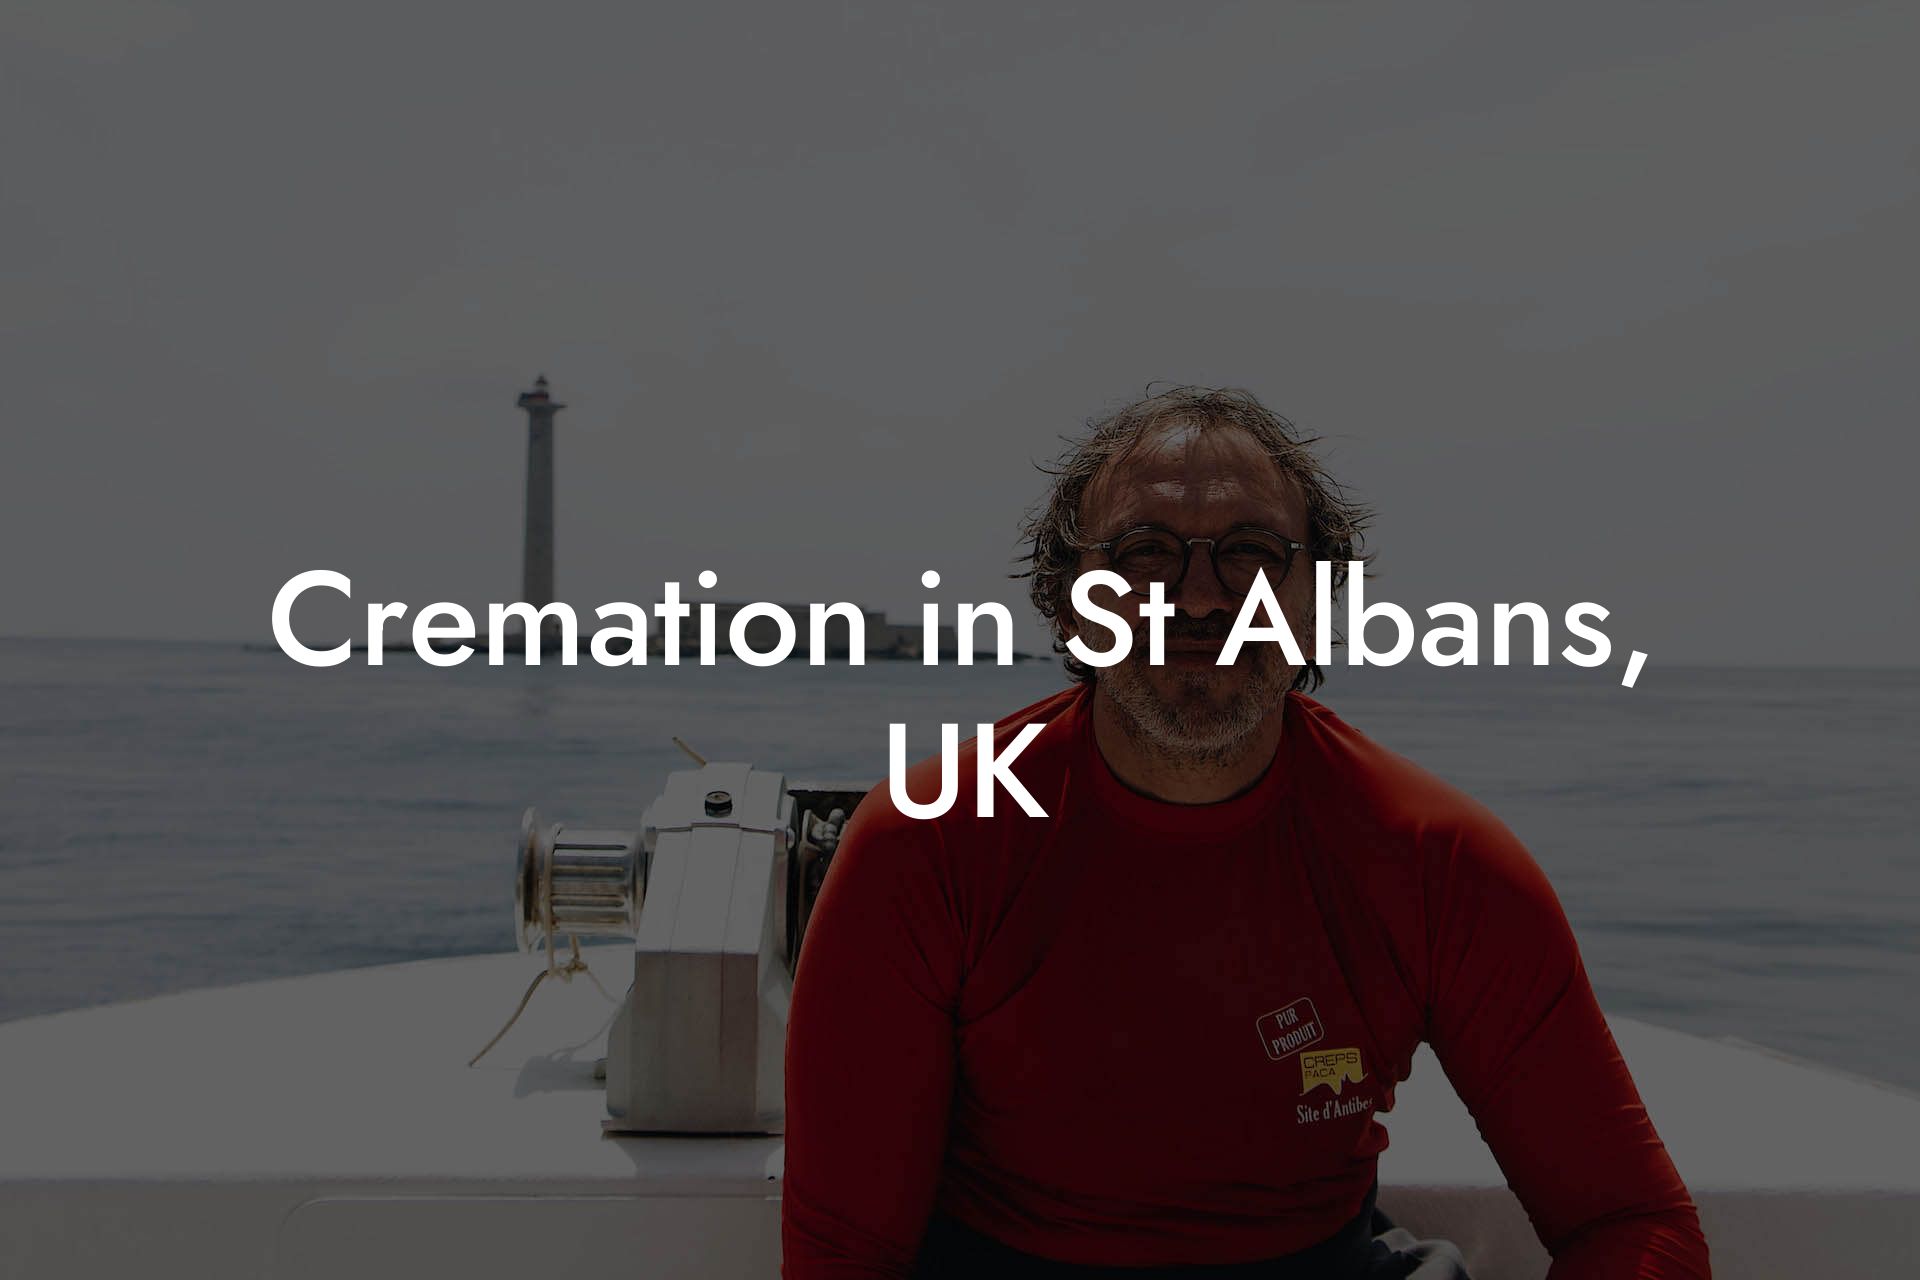 Cremation in St Albans, UK